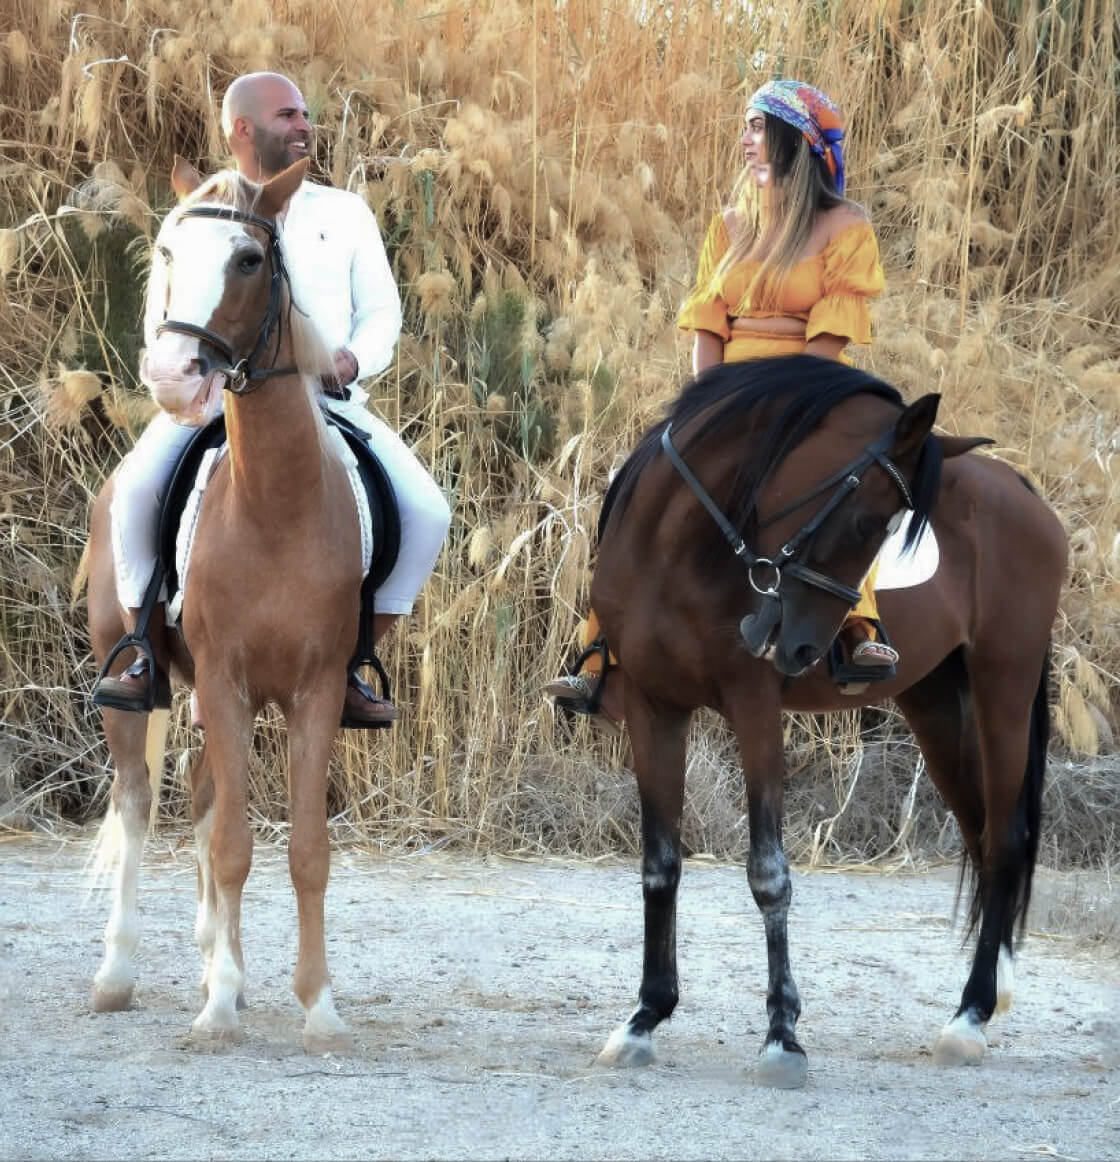 Two people riding horses in Hurghada